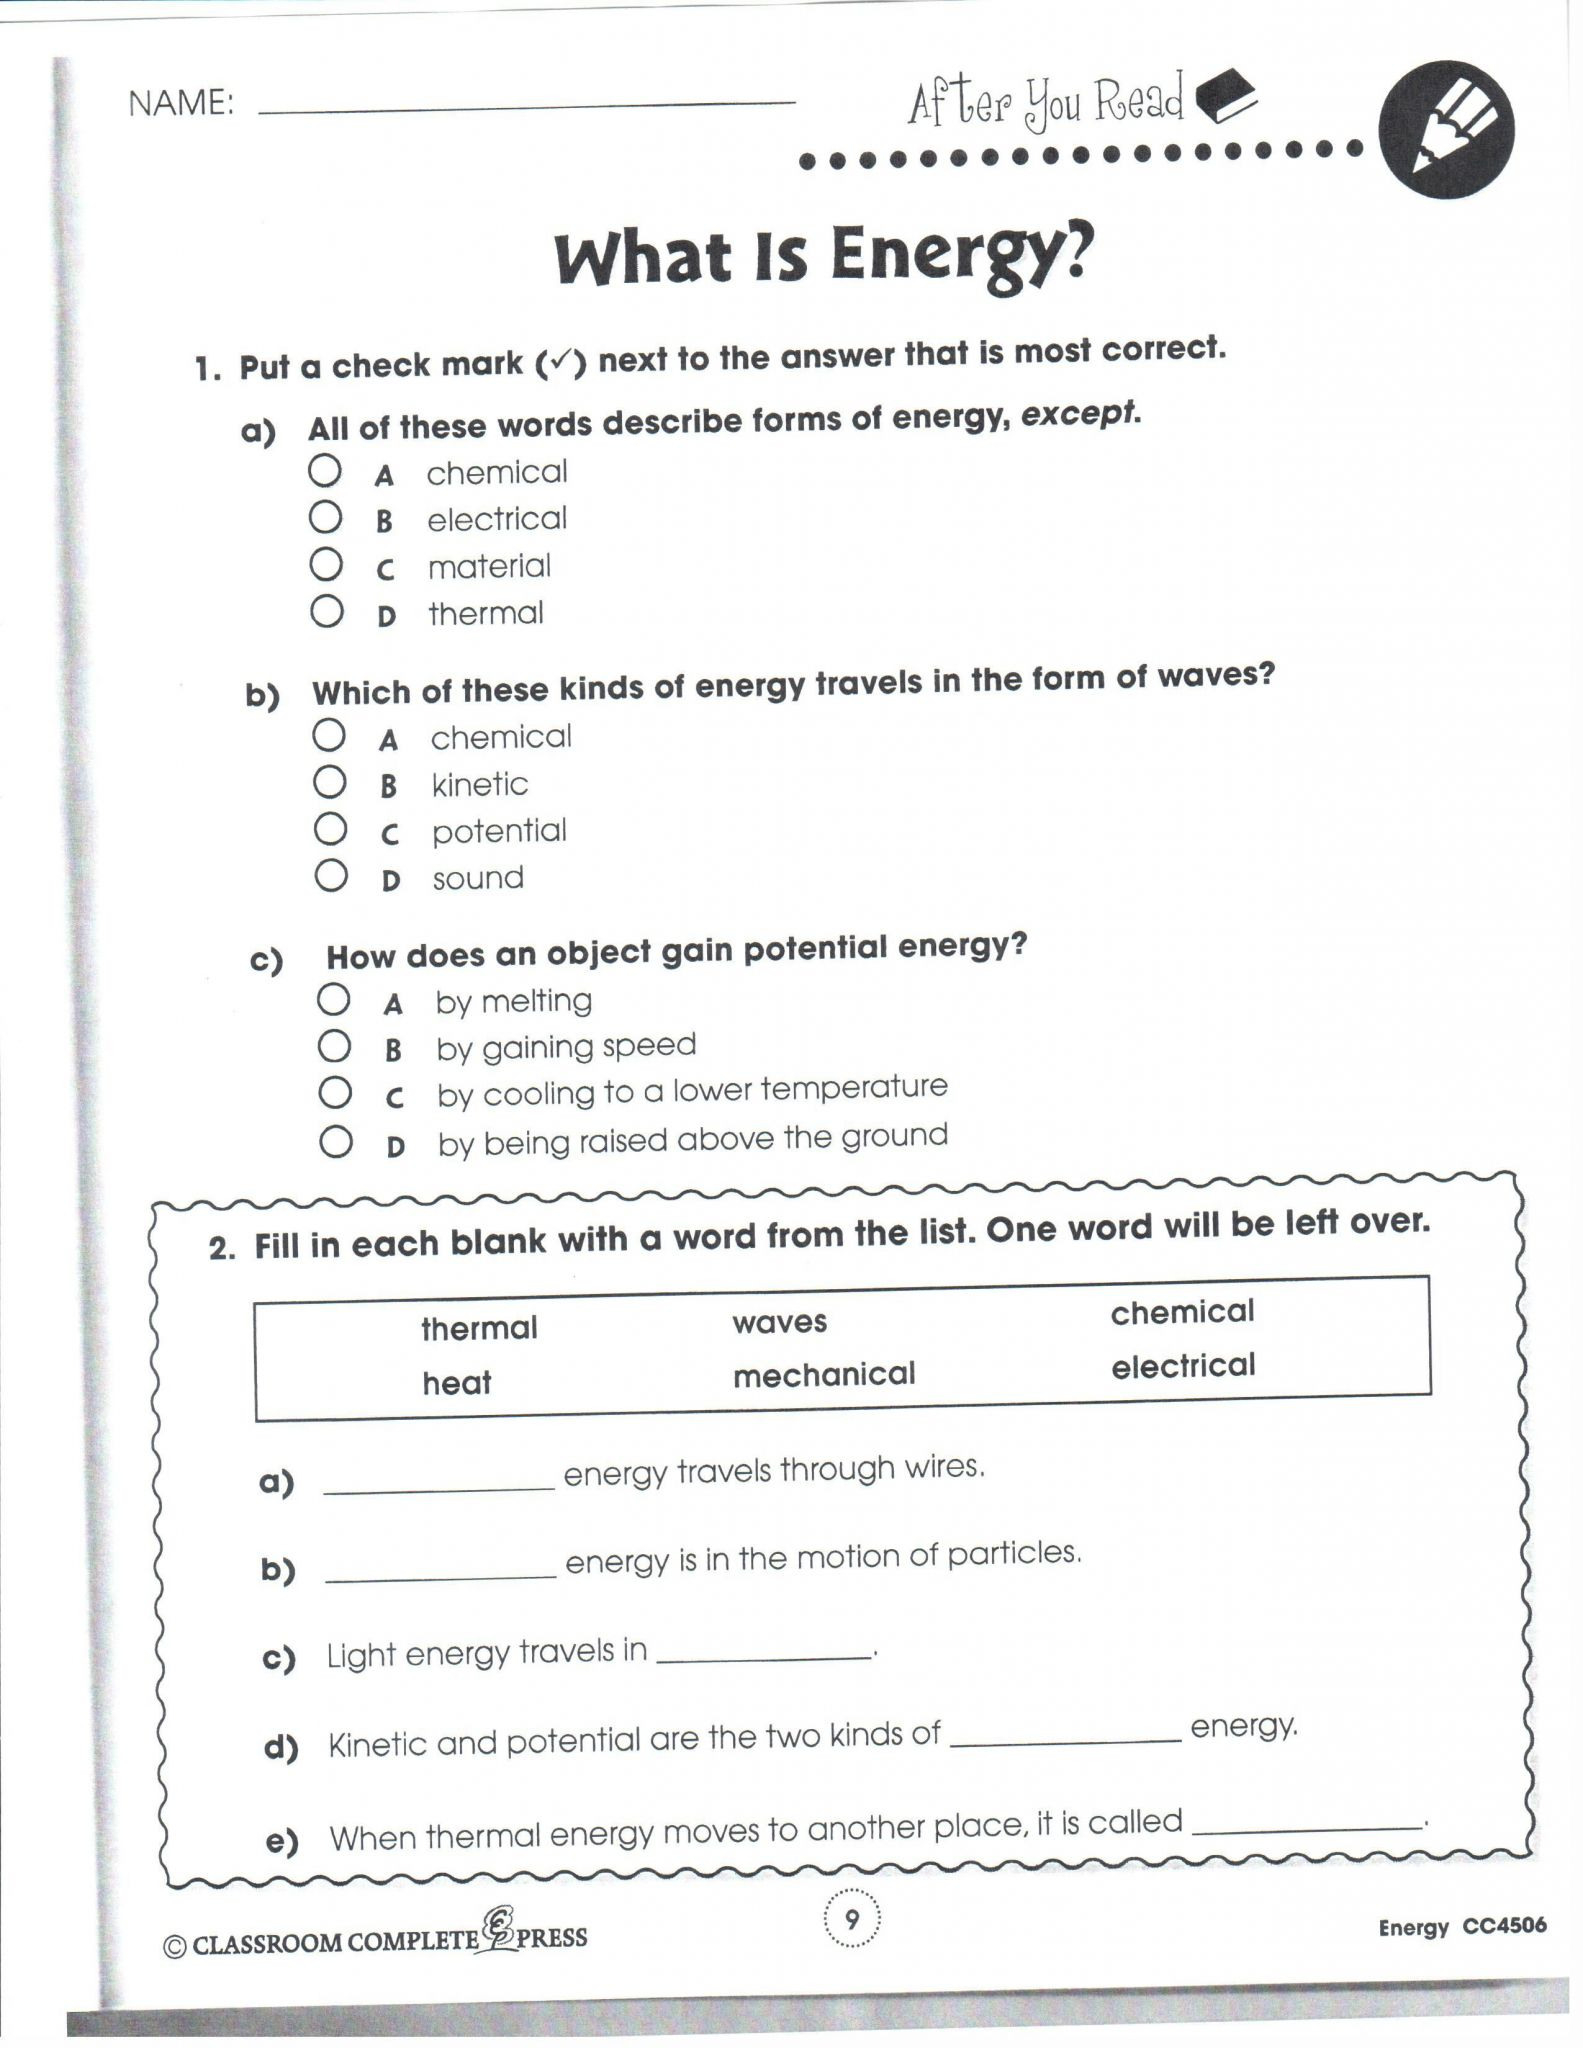 Photosynthesis Review Worksheet Answer Key —